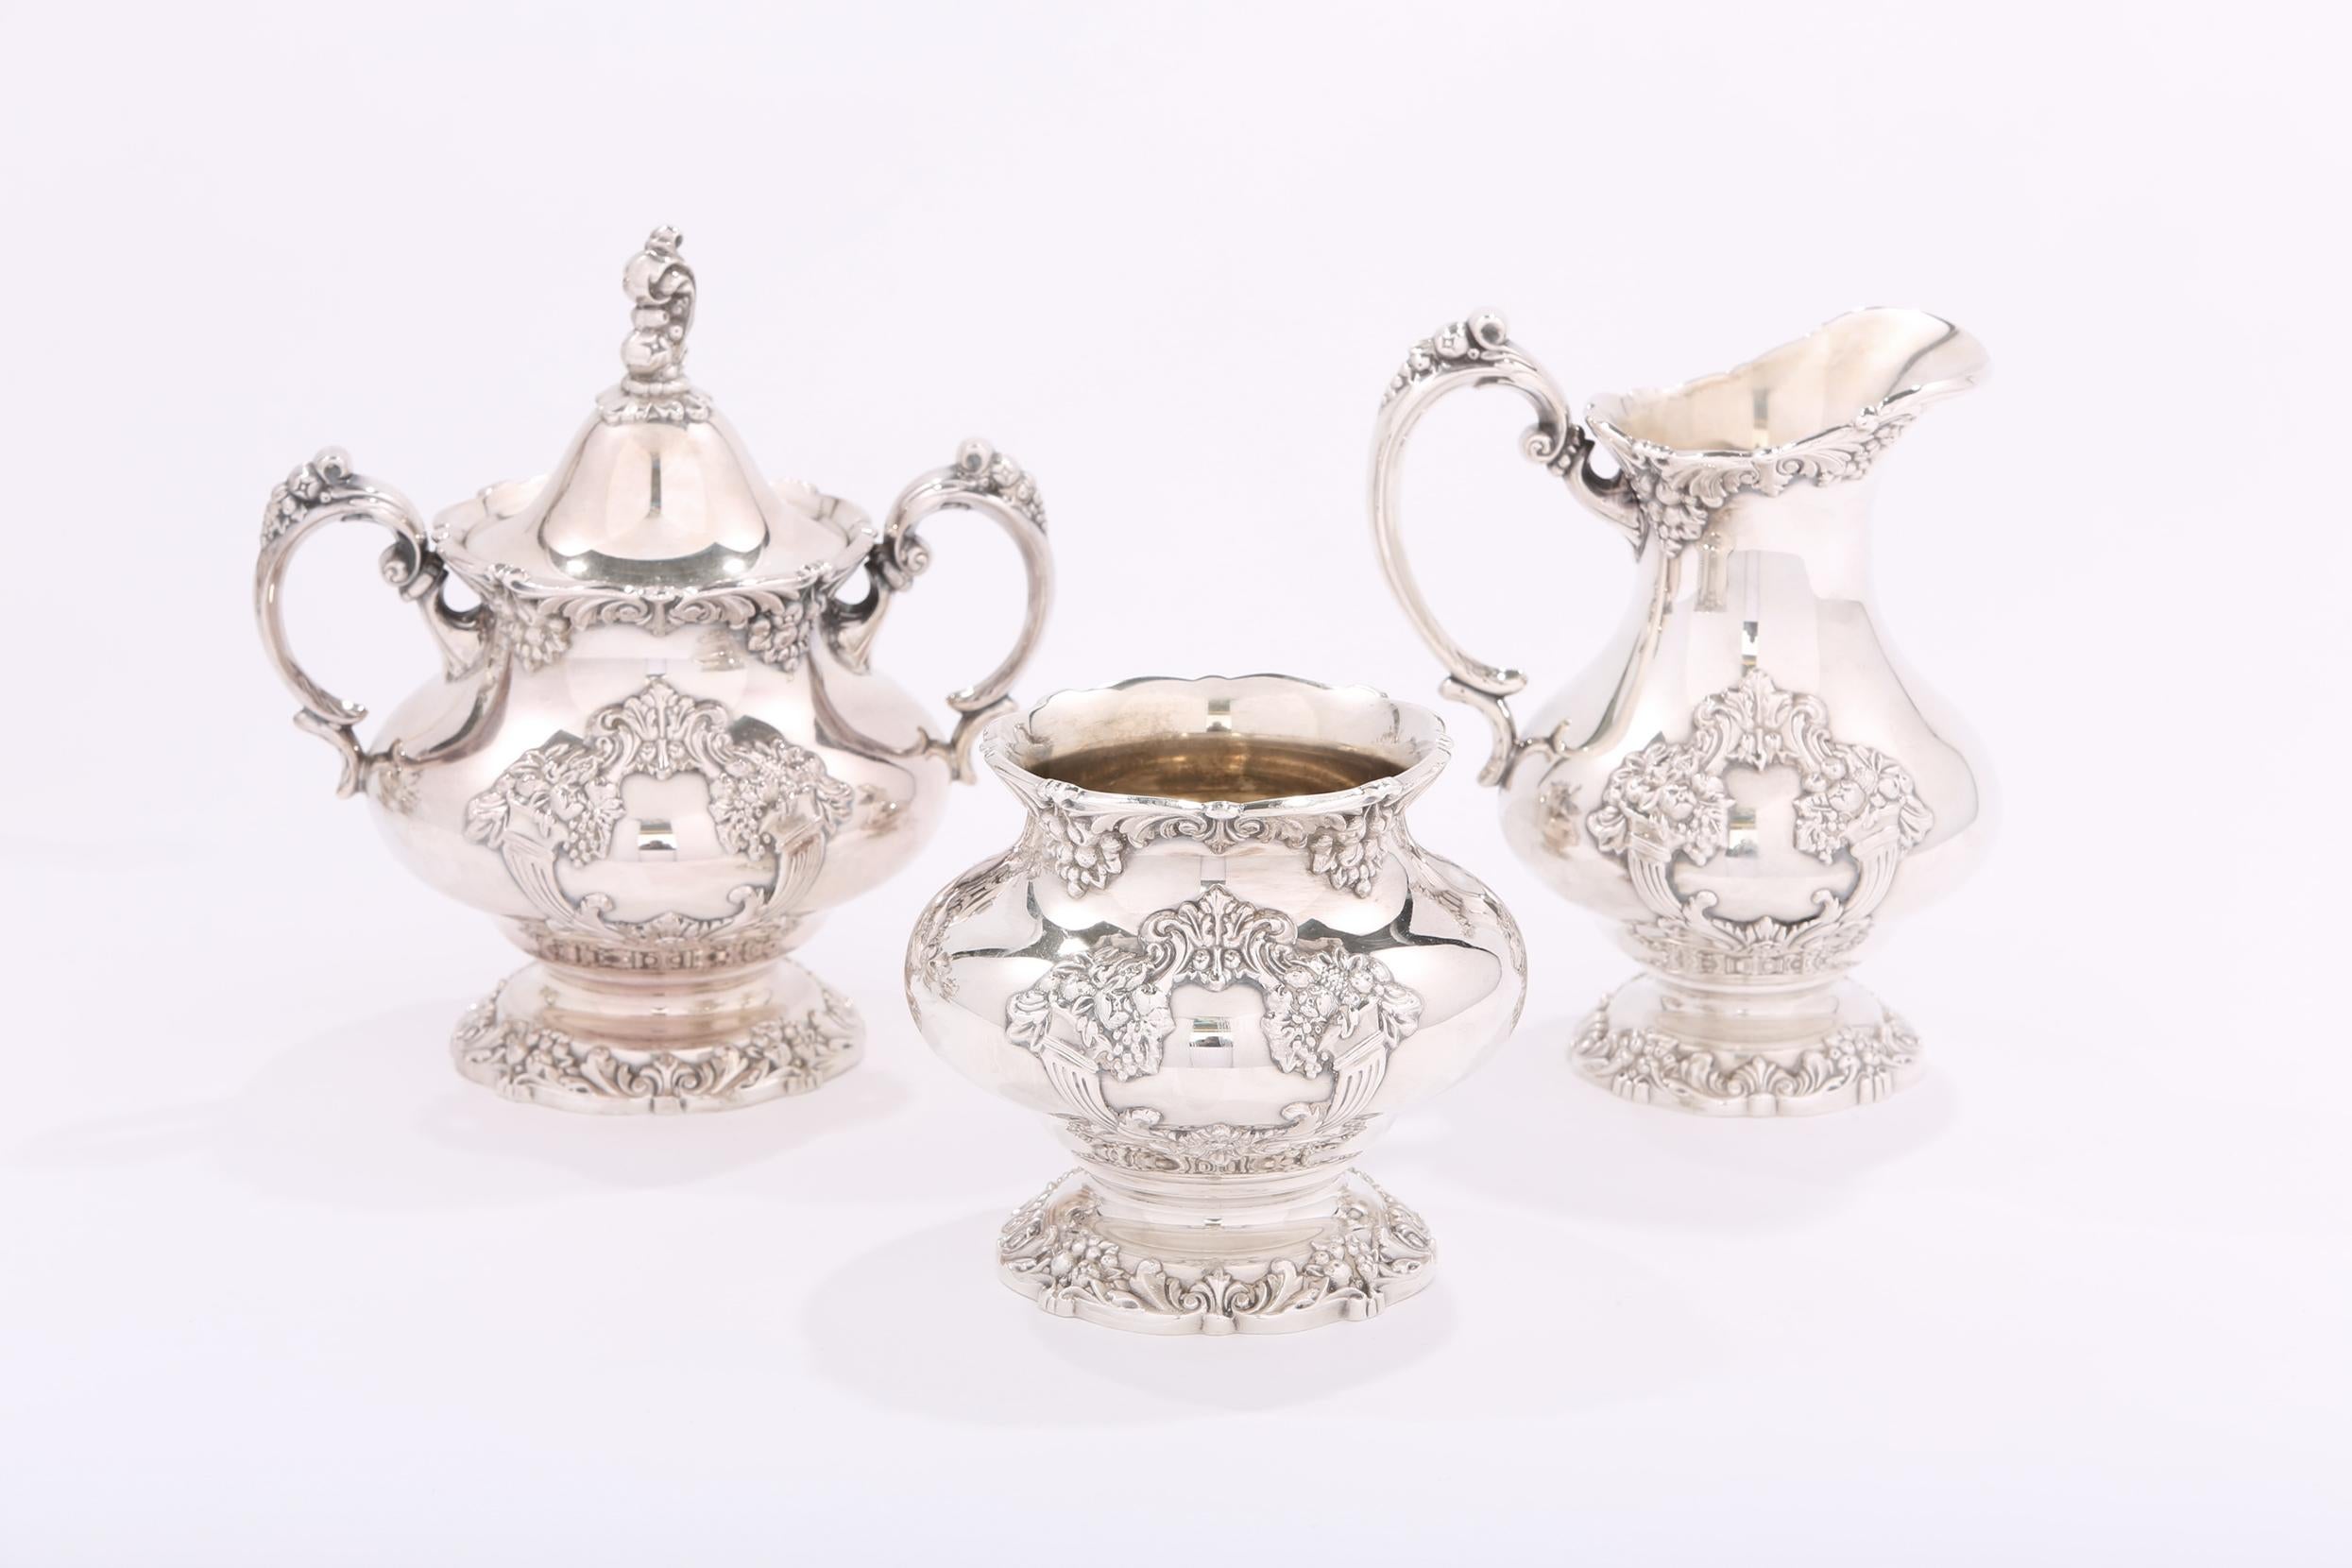 how much is a silver coffee set worth